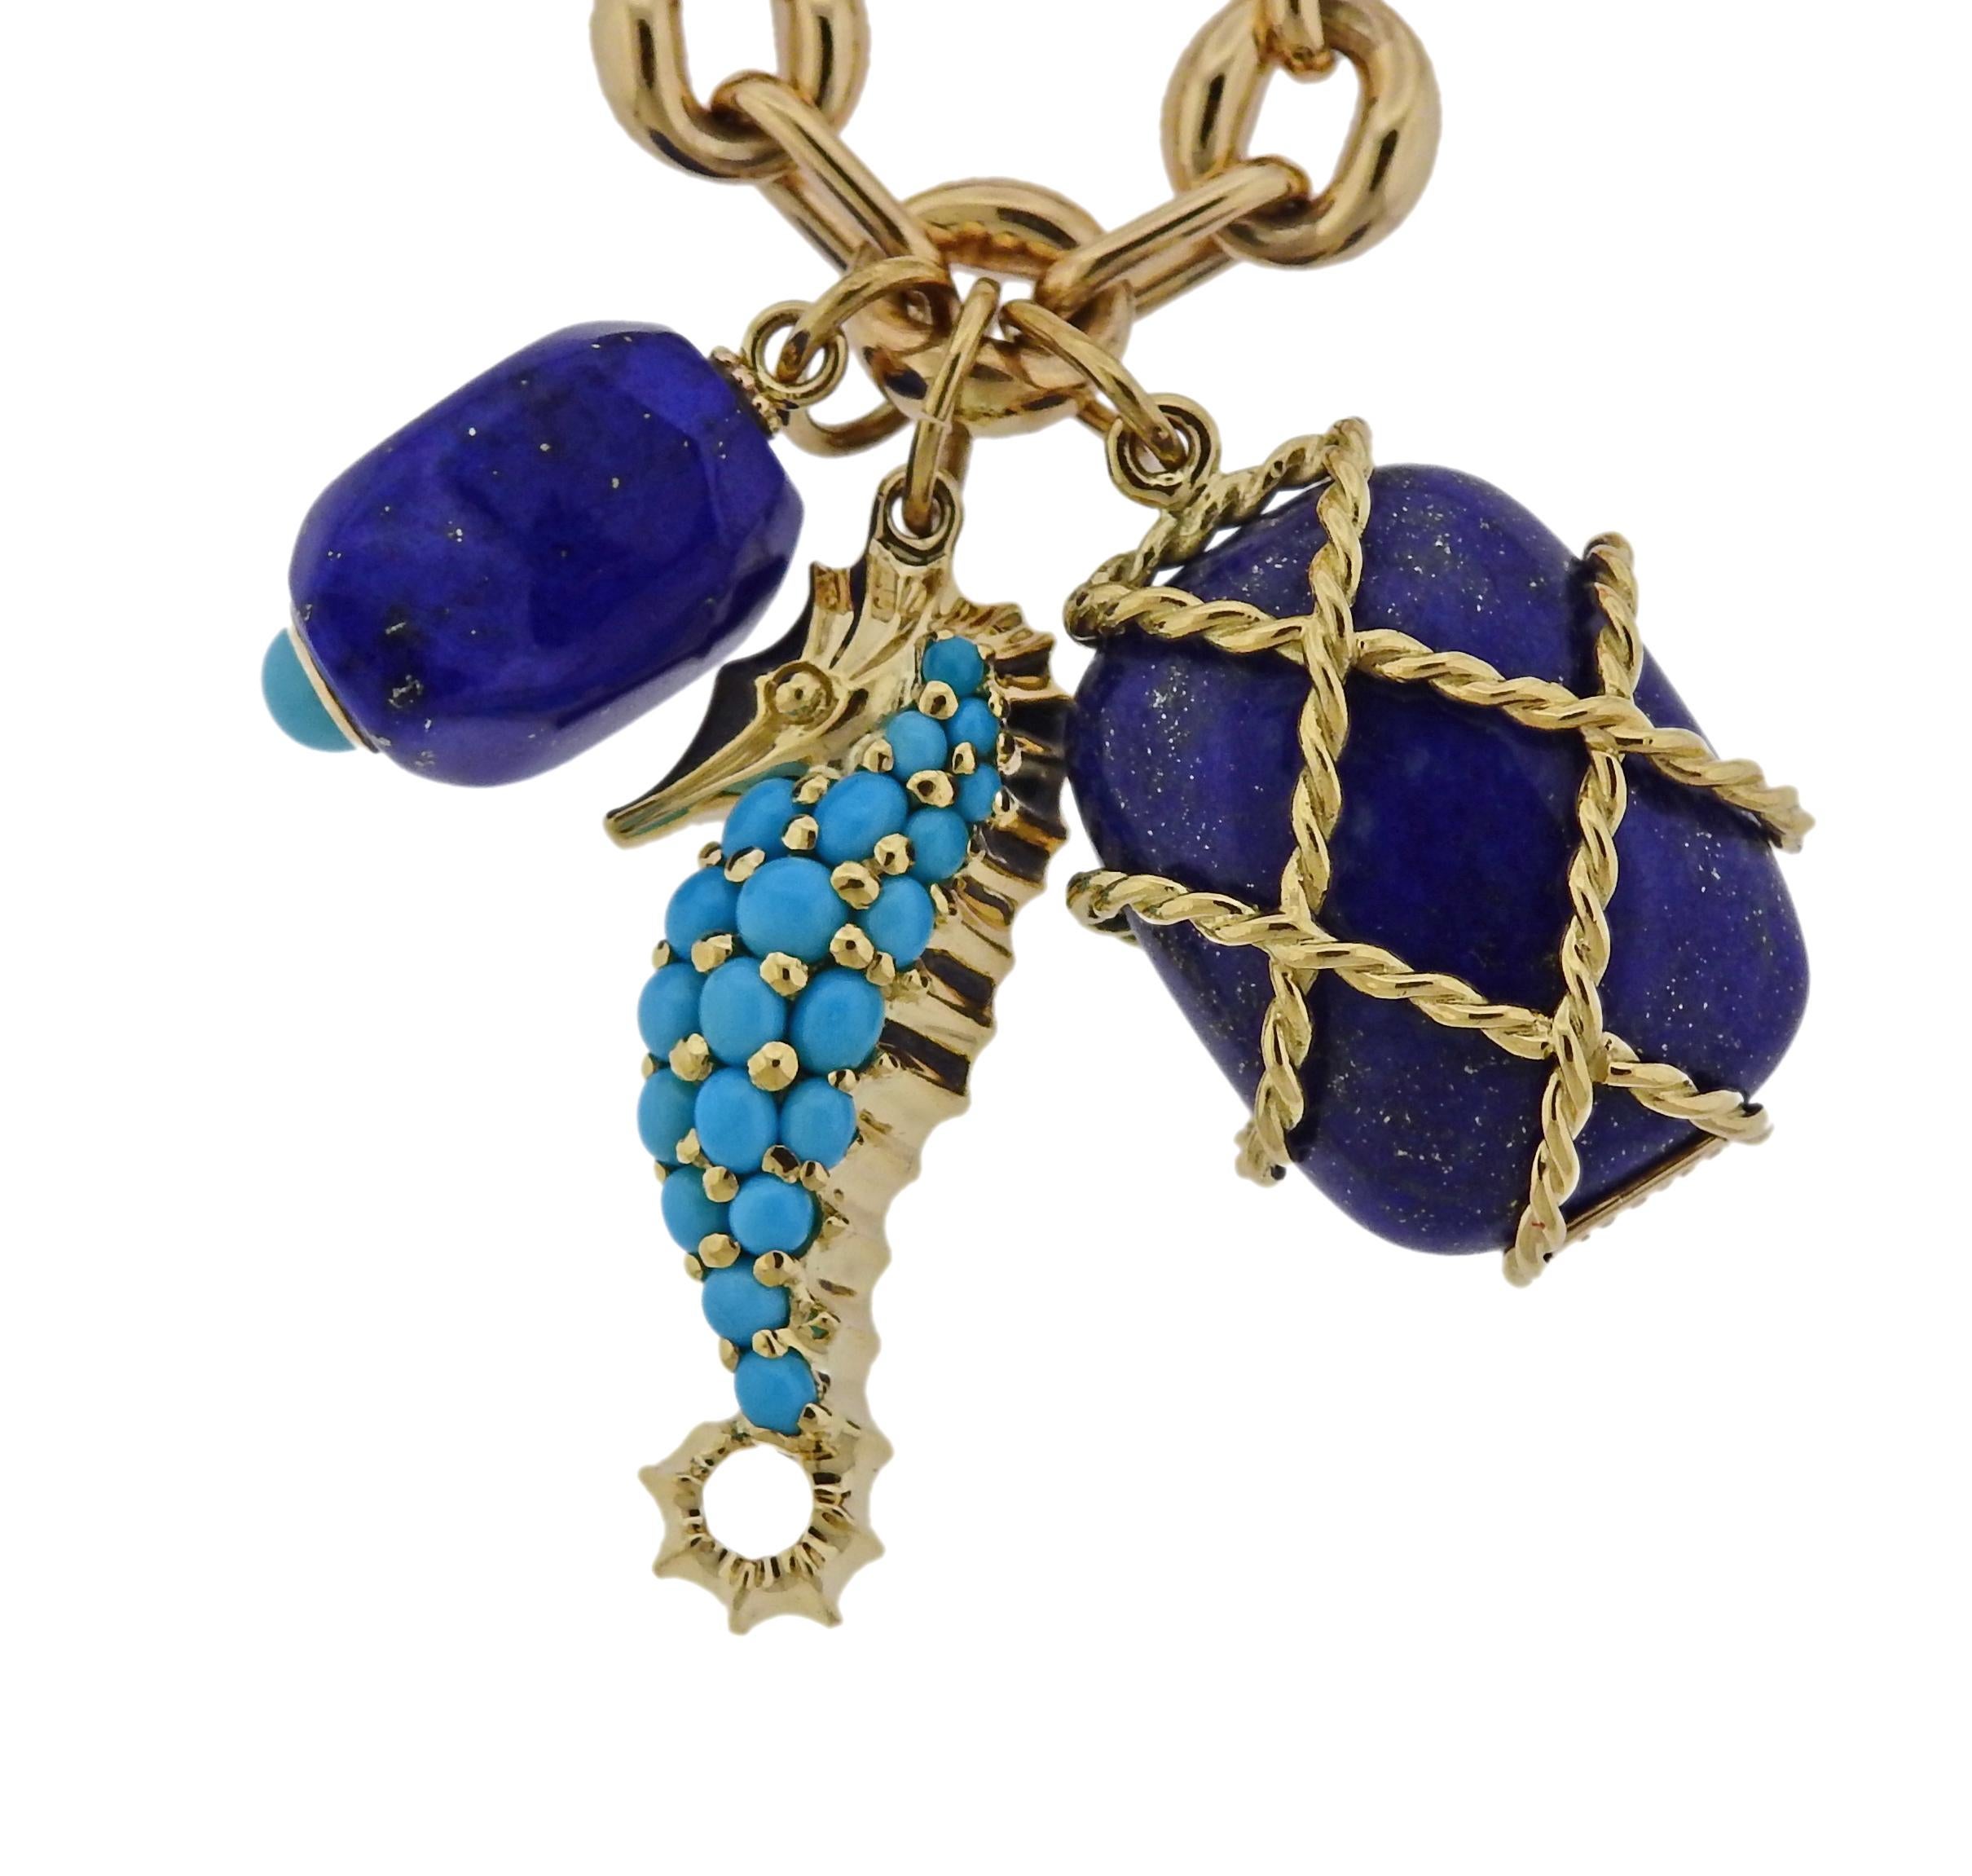 18k yellow gold long chain necklace, complimented with three charm pendants - turquoise seahorse, caged lapis and nugget pendant. All designed by Seaman Schepps.  Necklace is 31.5